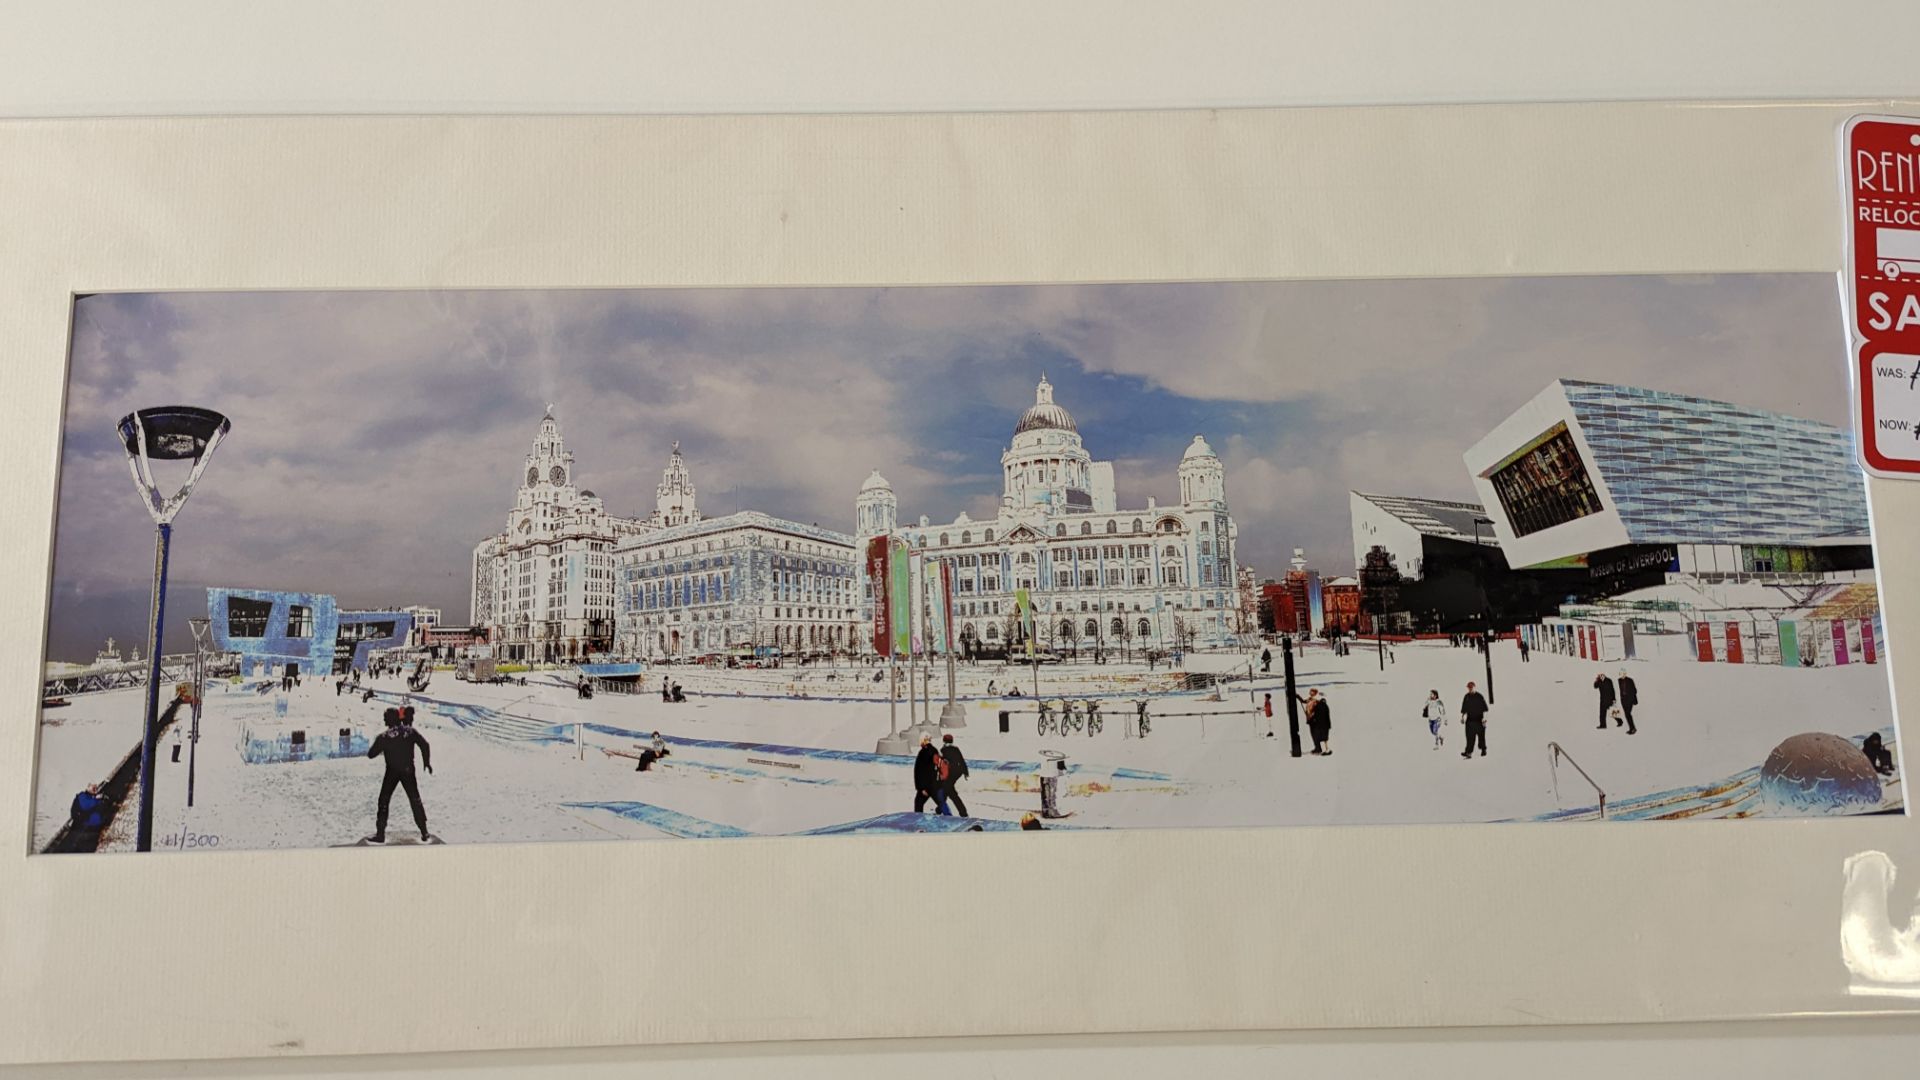 Limited edition print, no. 11/300, of Liverpool scene by M W Burns. Original selling price £170. In - Image 3 of 11